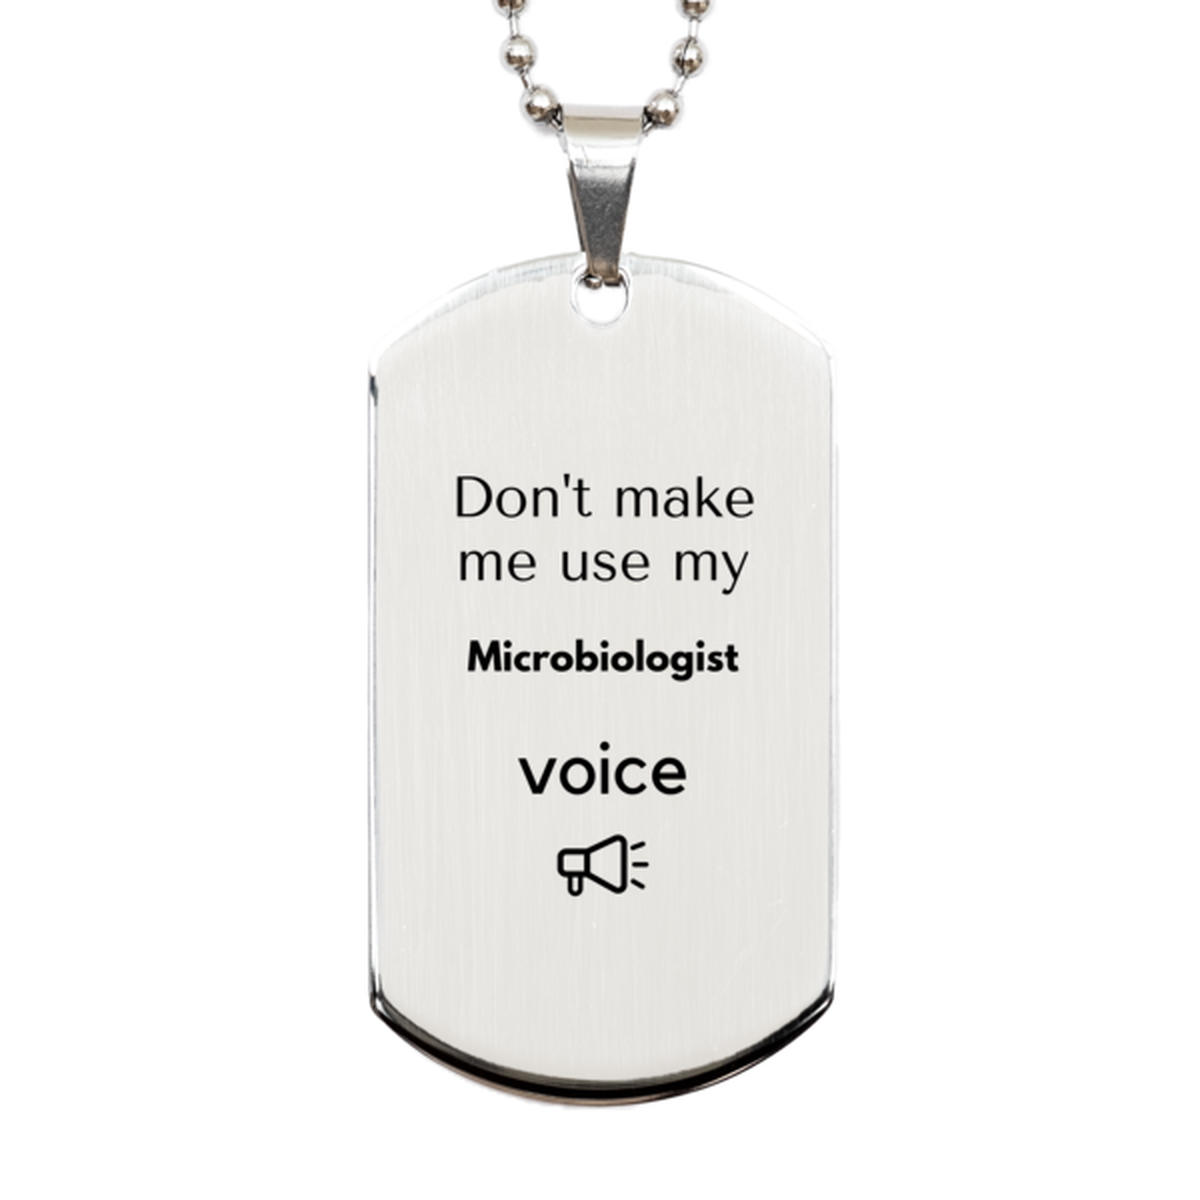 Don't make me use my Microbiologist voice, Sarcasm Microbiologist Gifts, Christmas Microbiologist Silver Dog Tag Birthday Unique Gifts For Microbiologist Coworkers, Men, Women, Colleague, Friends